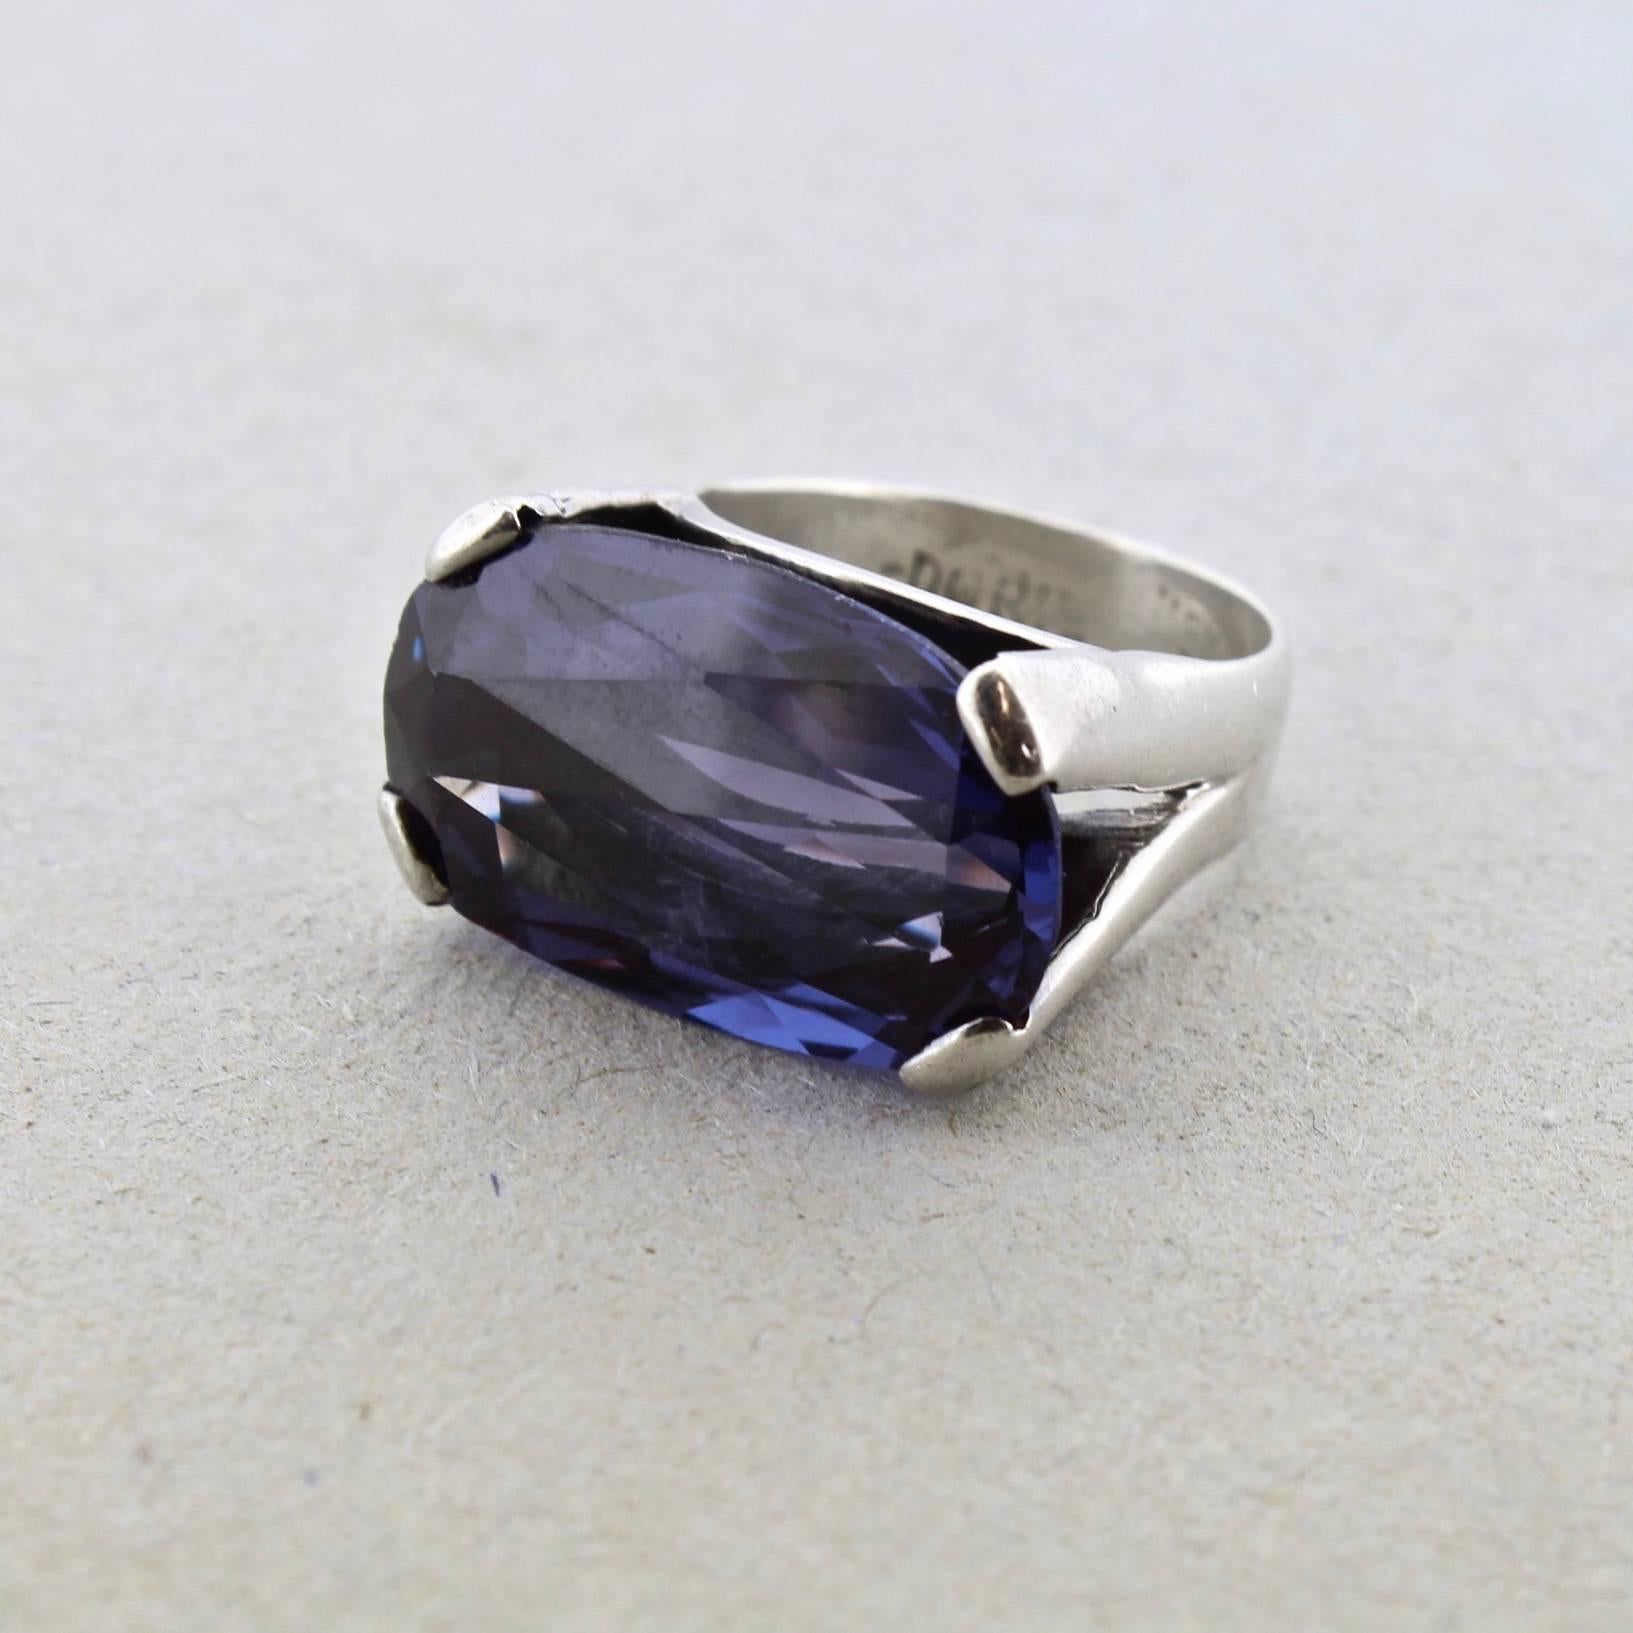 A modernist Mexican sterling silver and prong set simulated Alexandrite cocktail ring from the Doris Silver Shop in Mexico City. Very nice color change to the stone. 

Signed in shank: Doris / Mexico / 925.

Ring size: circa 6 3/4.

Items